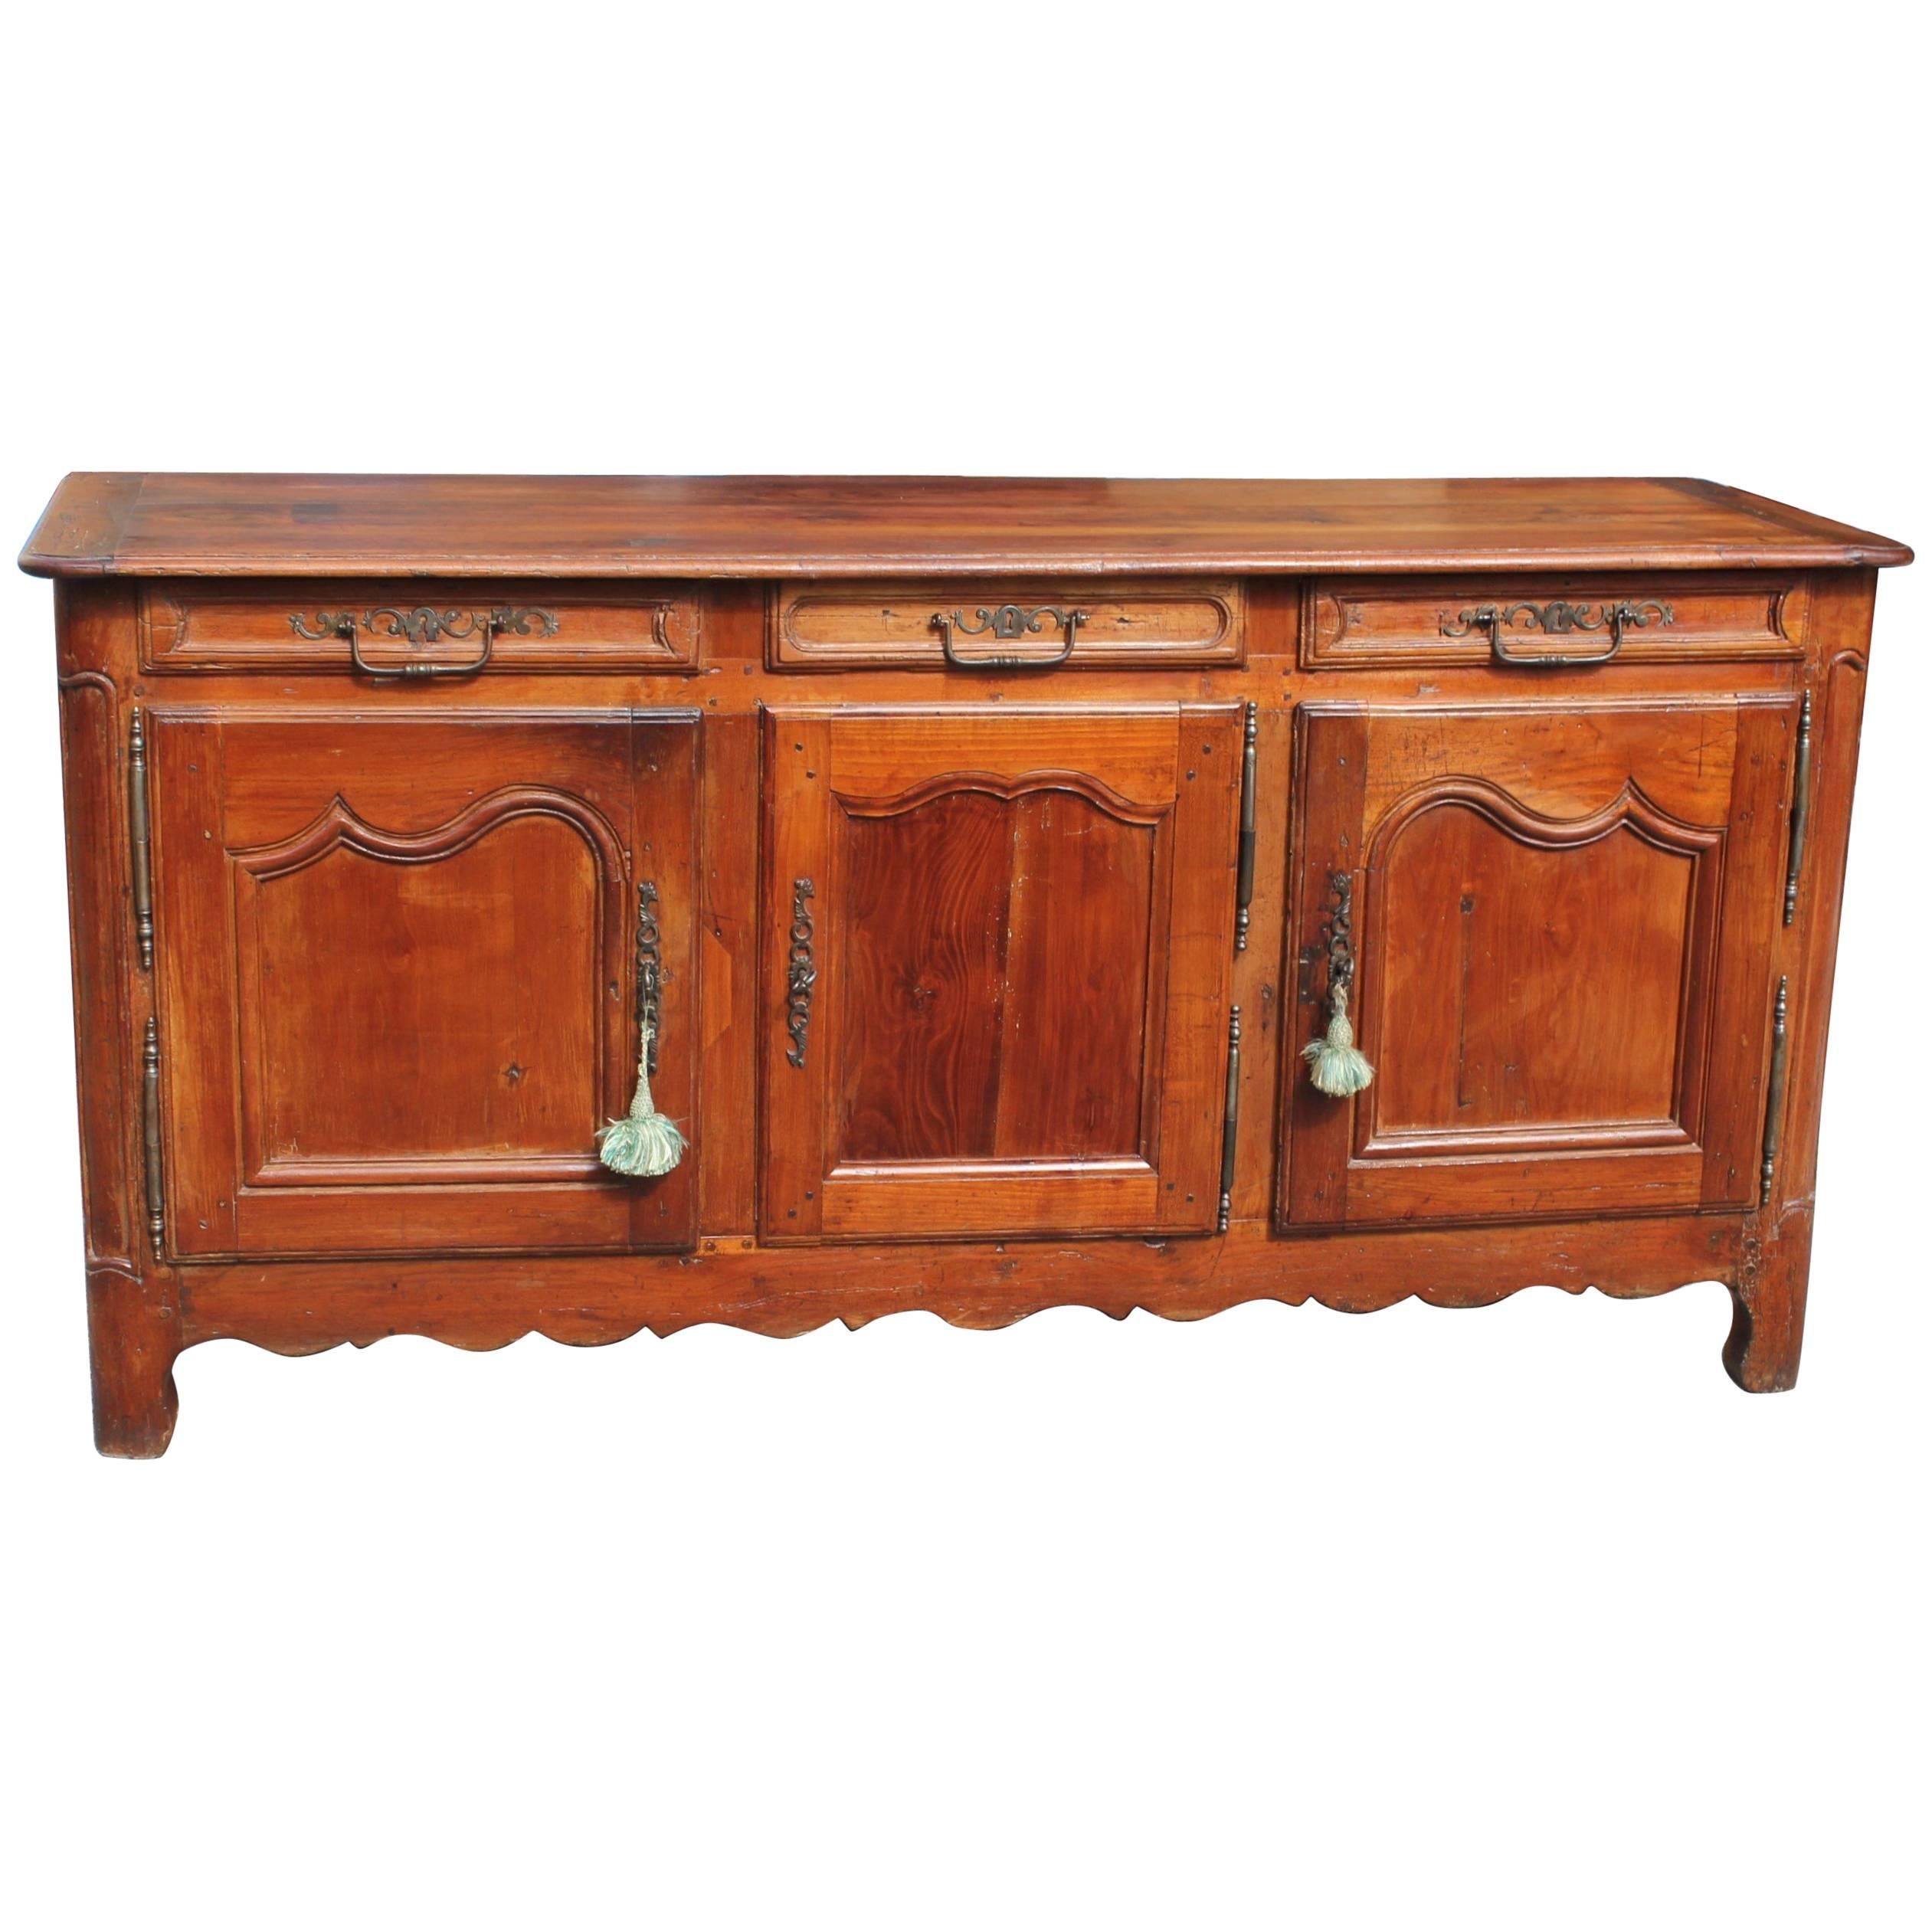 Country French Louis XV Sideboard or Buffet Solid Cherrywood 18th Century Period